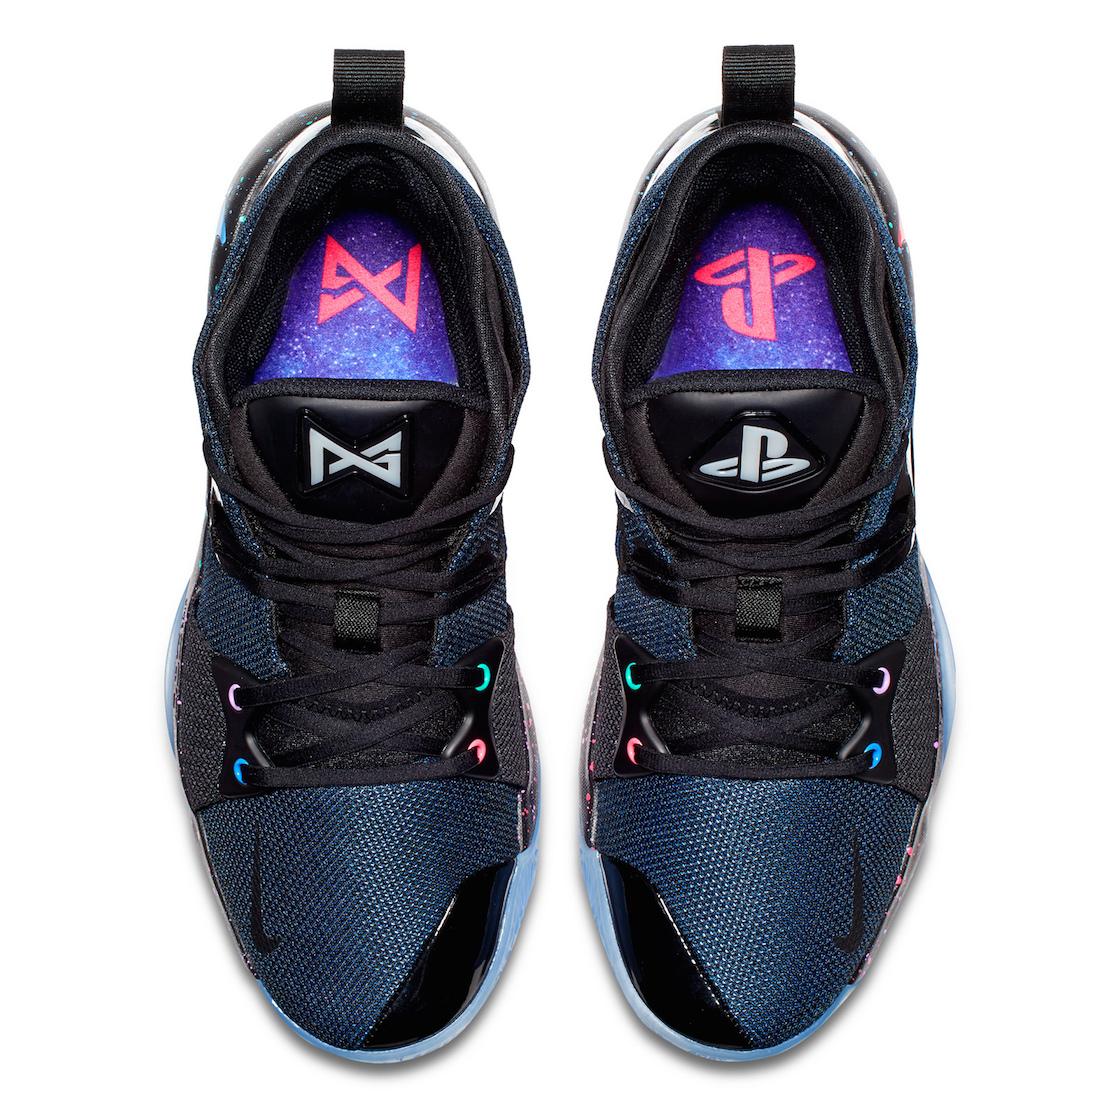 sony playstation nike shoes